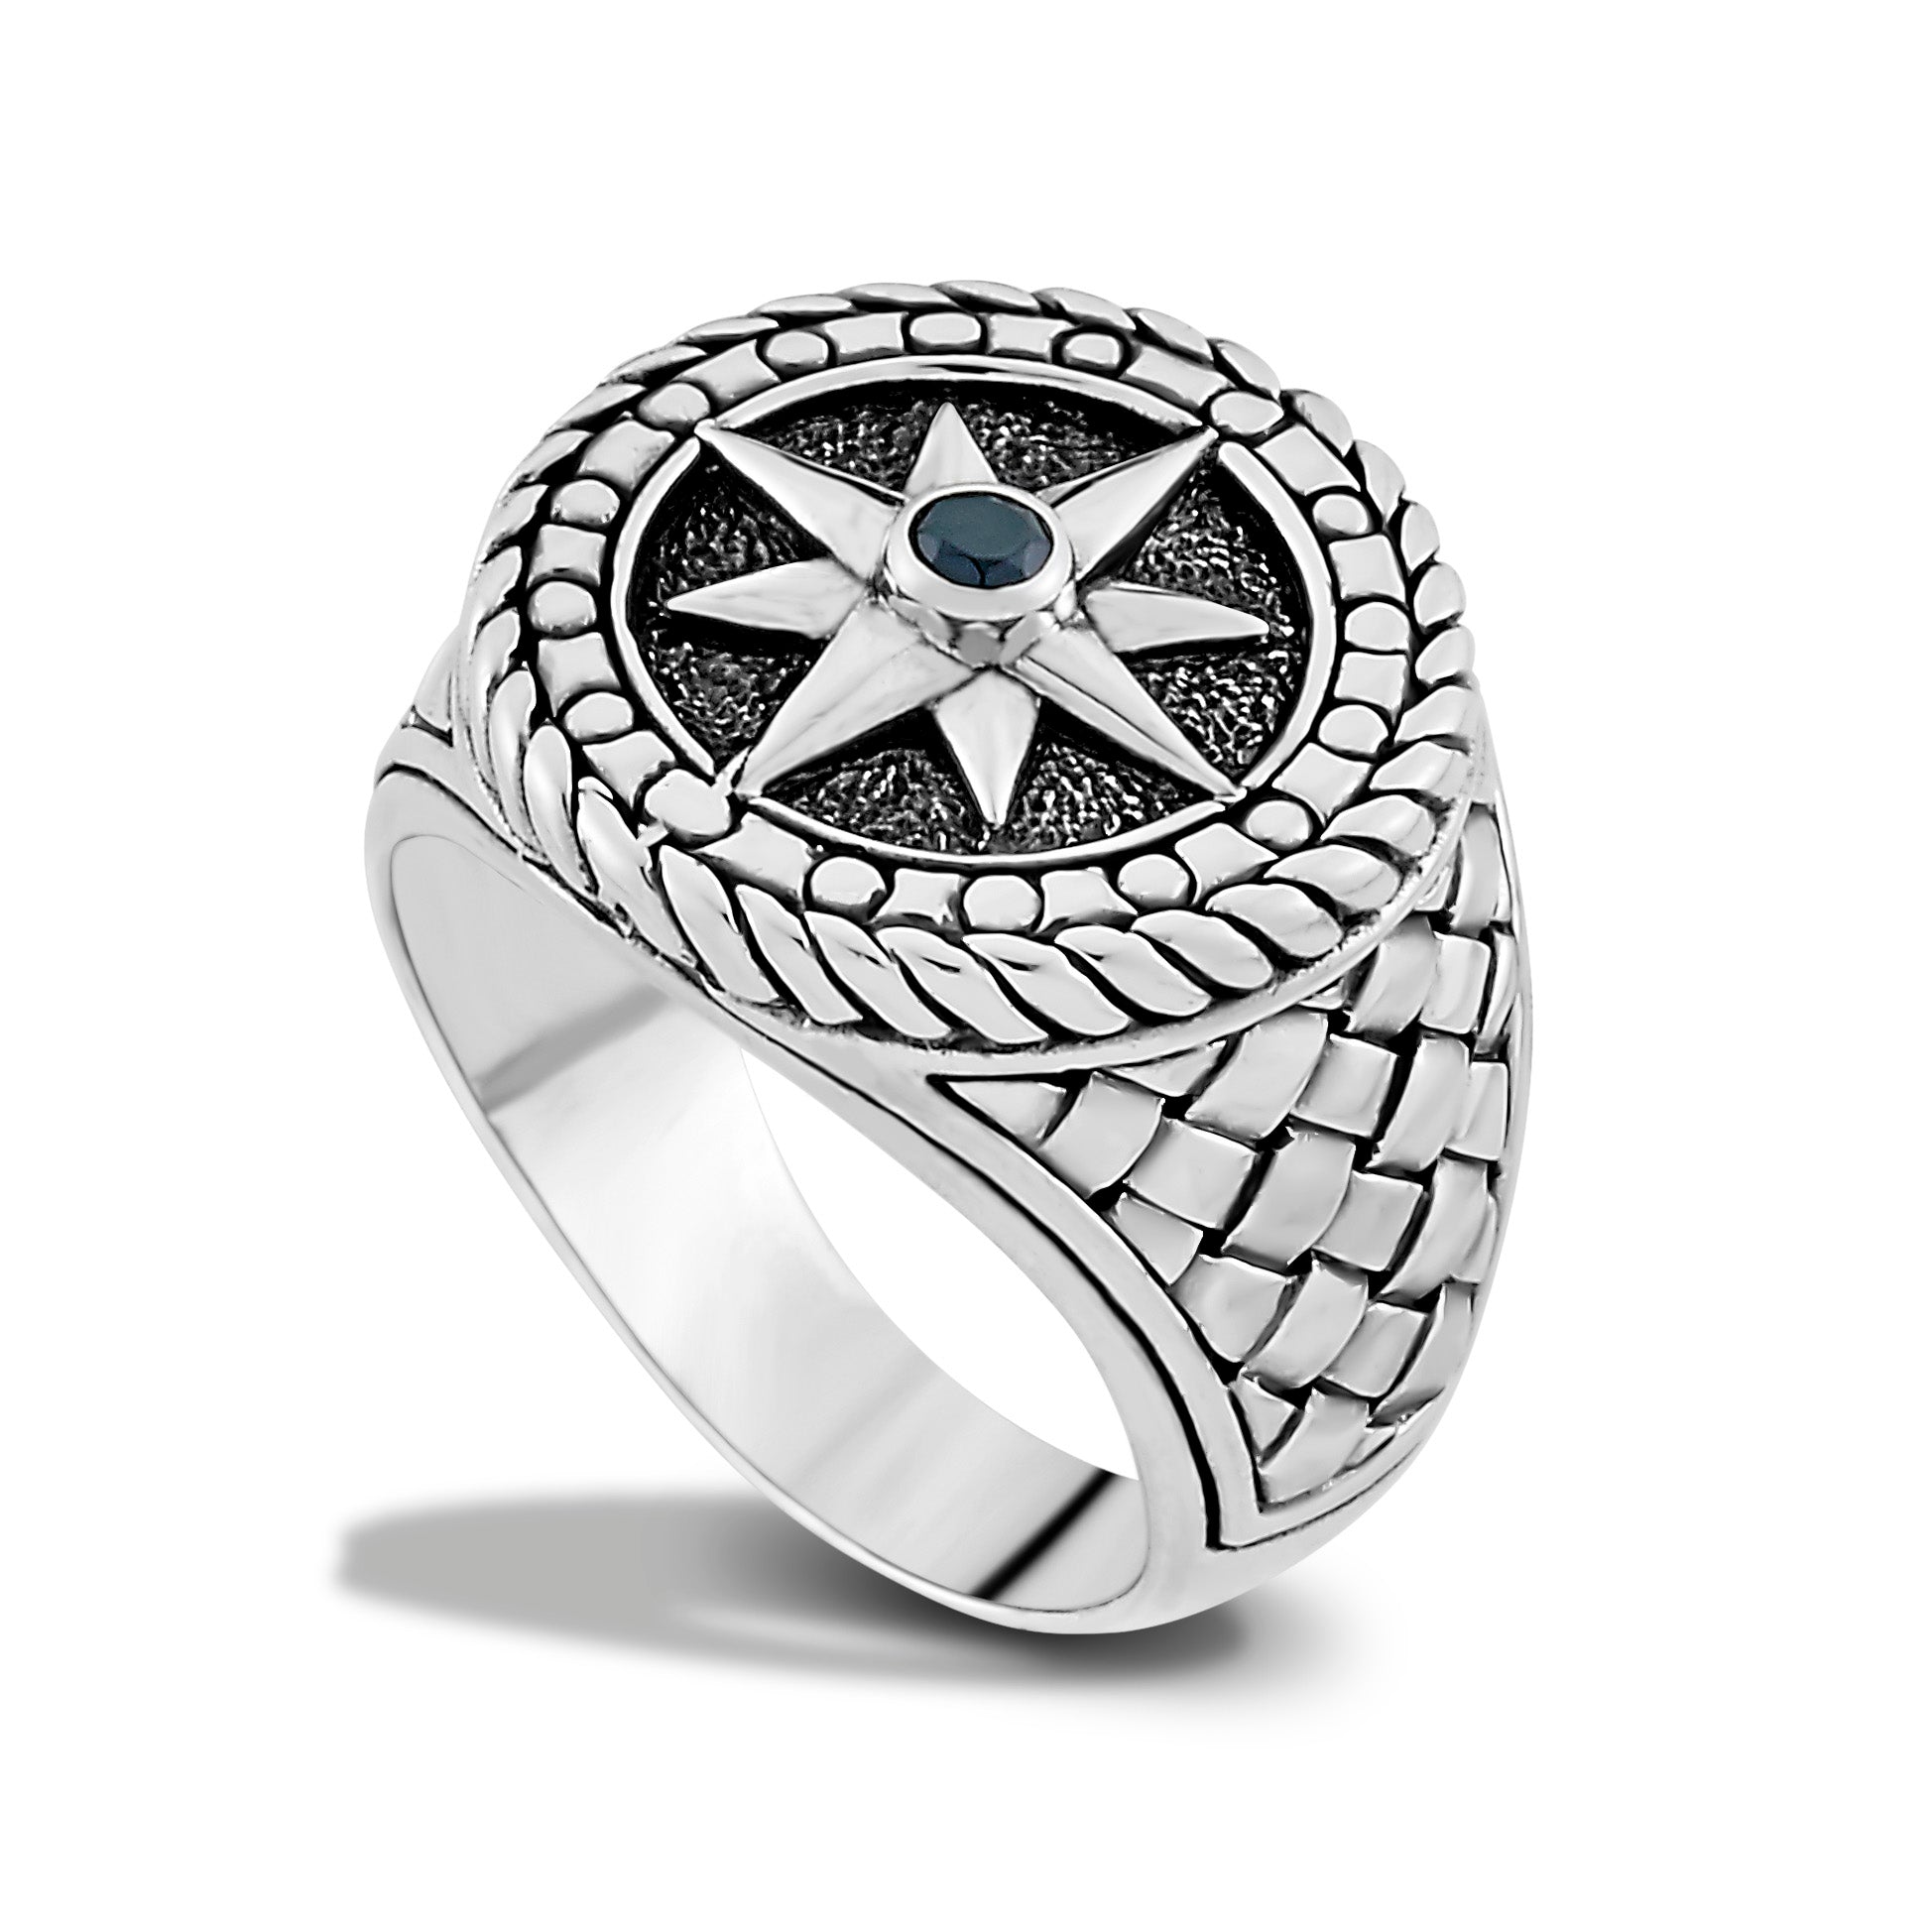 Black Spinel Wai Ring available at Talisman Collection Fine Jewelers in El Dorado Hills, CA and online. Specs: Black Spinel Wai Ring is crafted in Sterling Silver with a quilted design and features a star with black spinel in the center